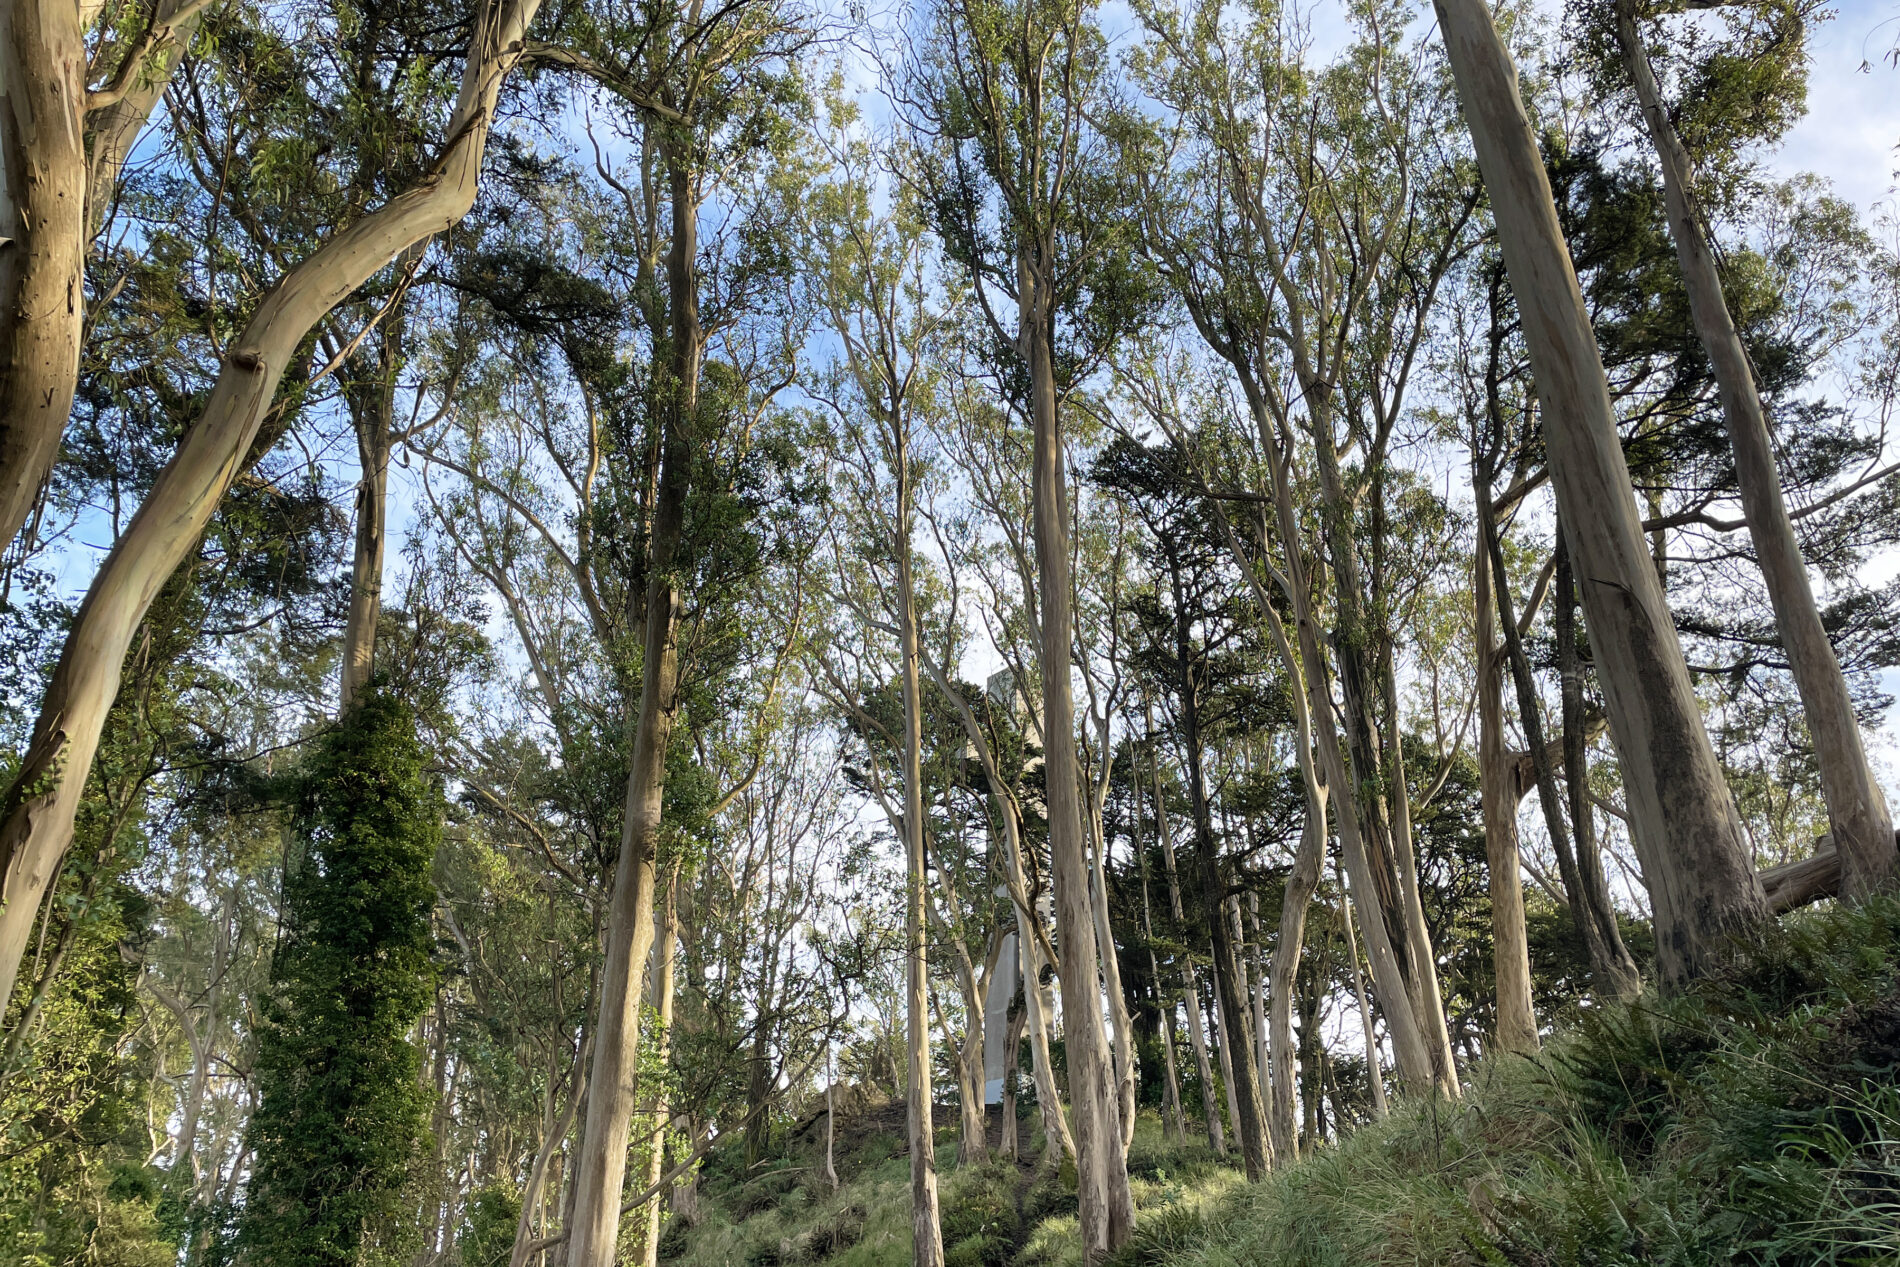 Looking up at the eucalyptus trees behind the Mt. Davidson Cross.